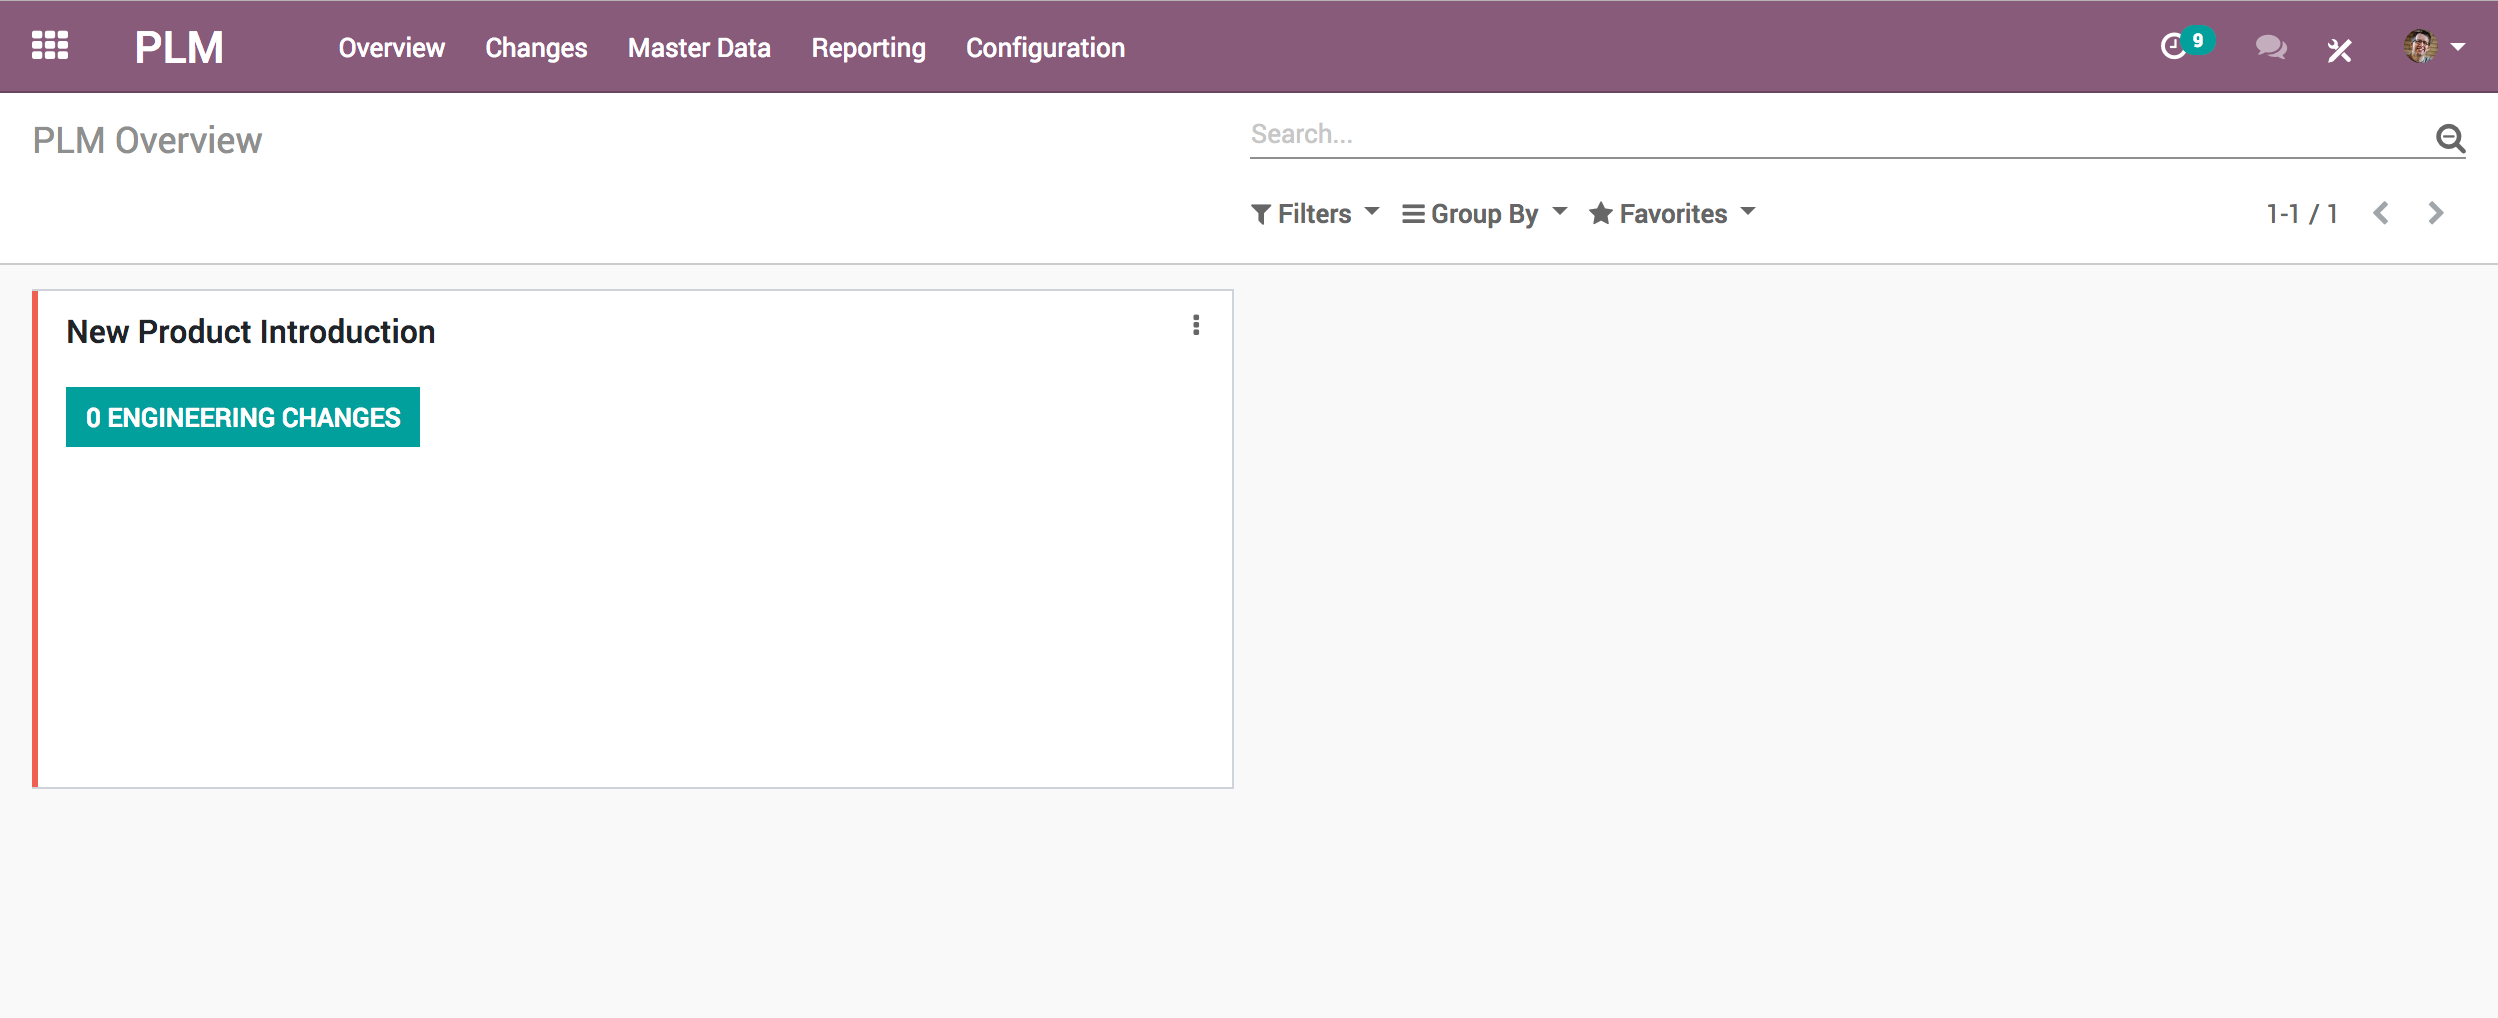 Odoo Manufacturing - Odoo PLM Overview